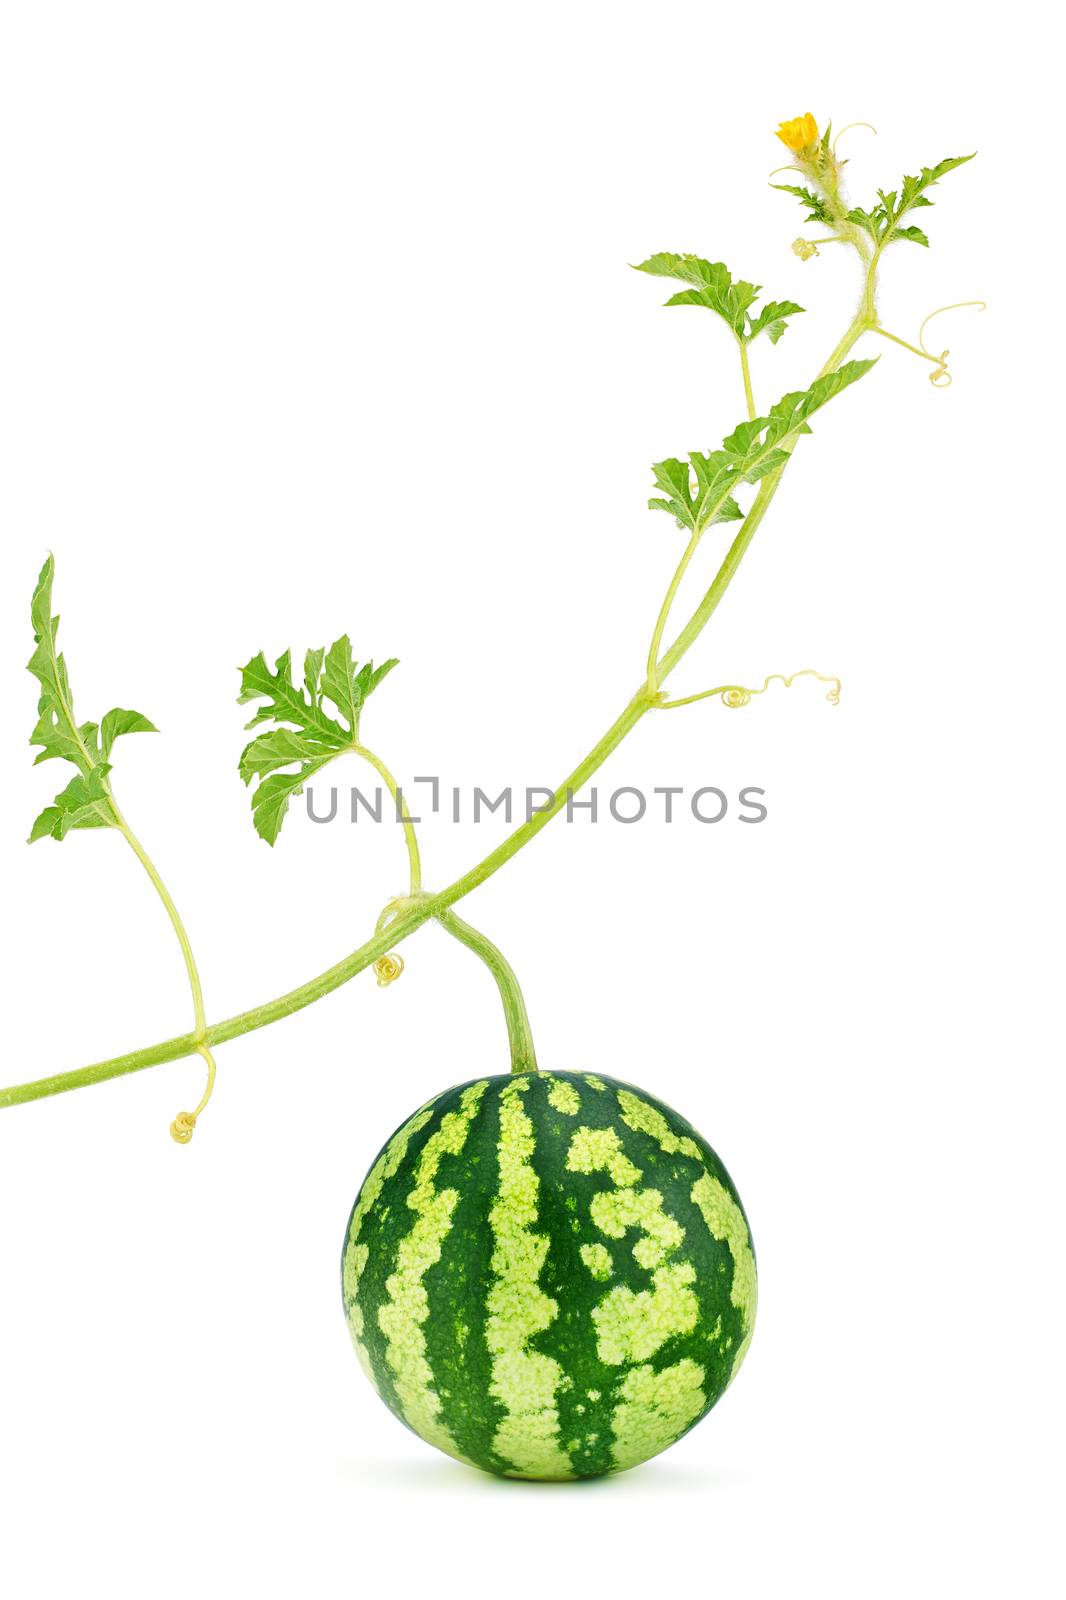 Watermelon fresh, juicy with green stem, leafs and yellow blossom, organic. Food close-up, isolated on white background